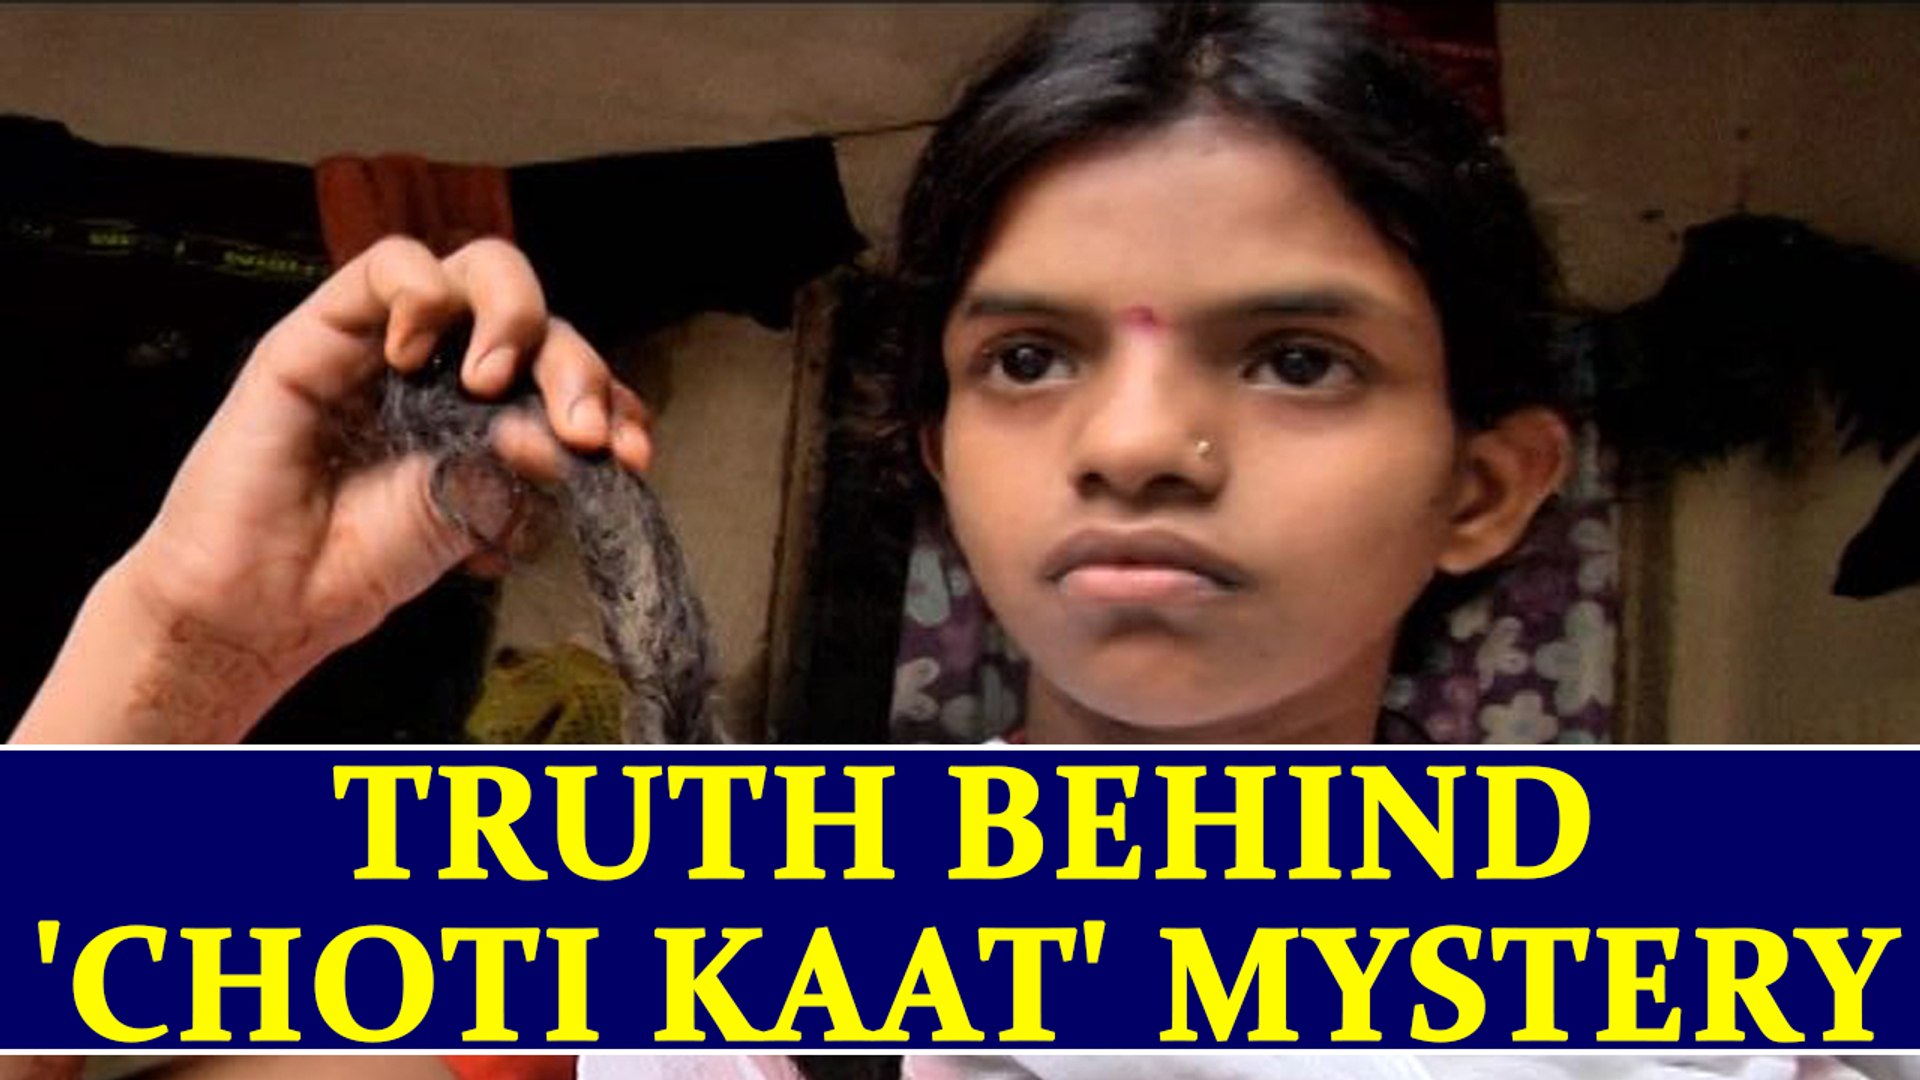 Choti kaat mystery: Various theories explained | Oneindia News - video  Dailymotion